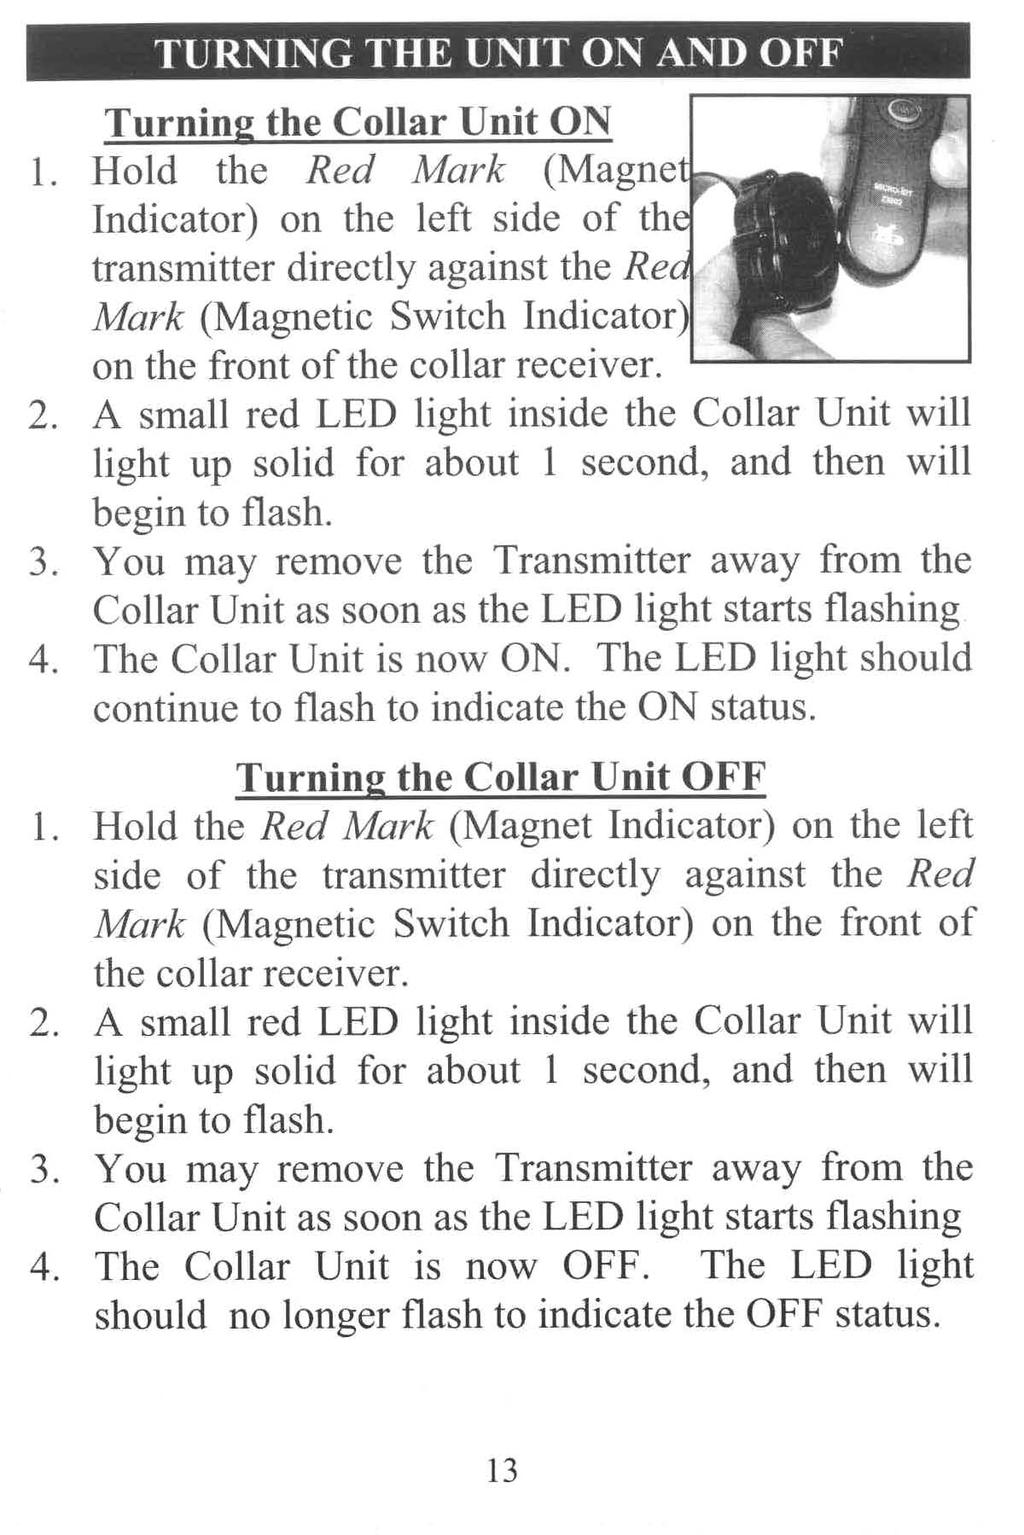 Turning the Collar Unit ON 1. Hold the Red Mark (Magne Indicator) on the left side of th transmitter directly against the Re Mark (Magnetic Switch Indicator on the front of the collar receiver. 2.